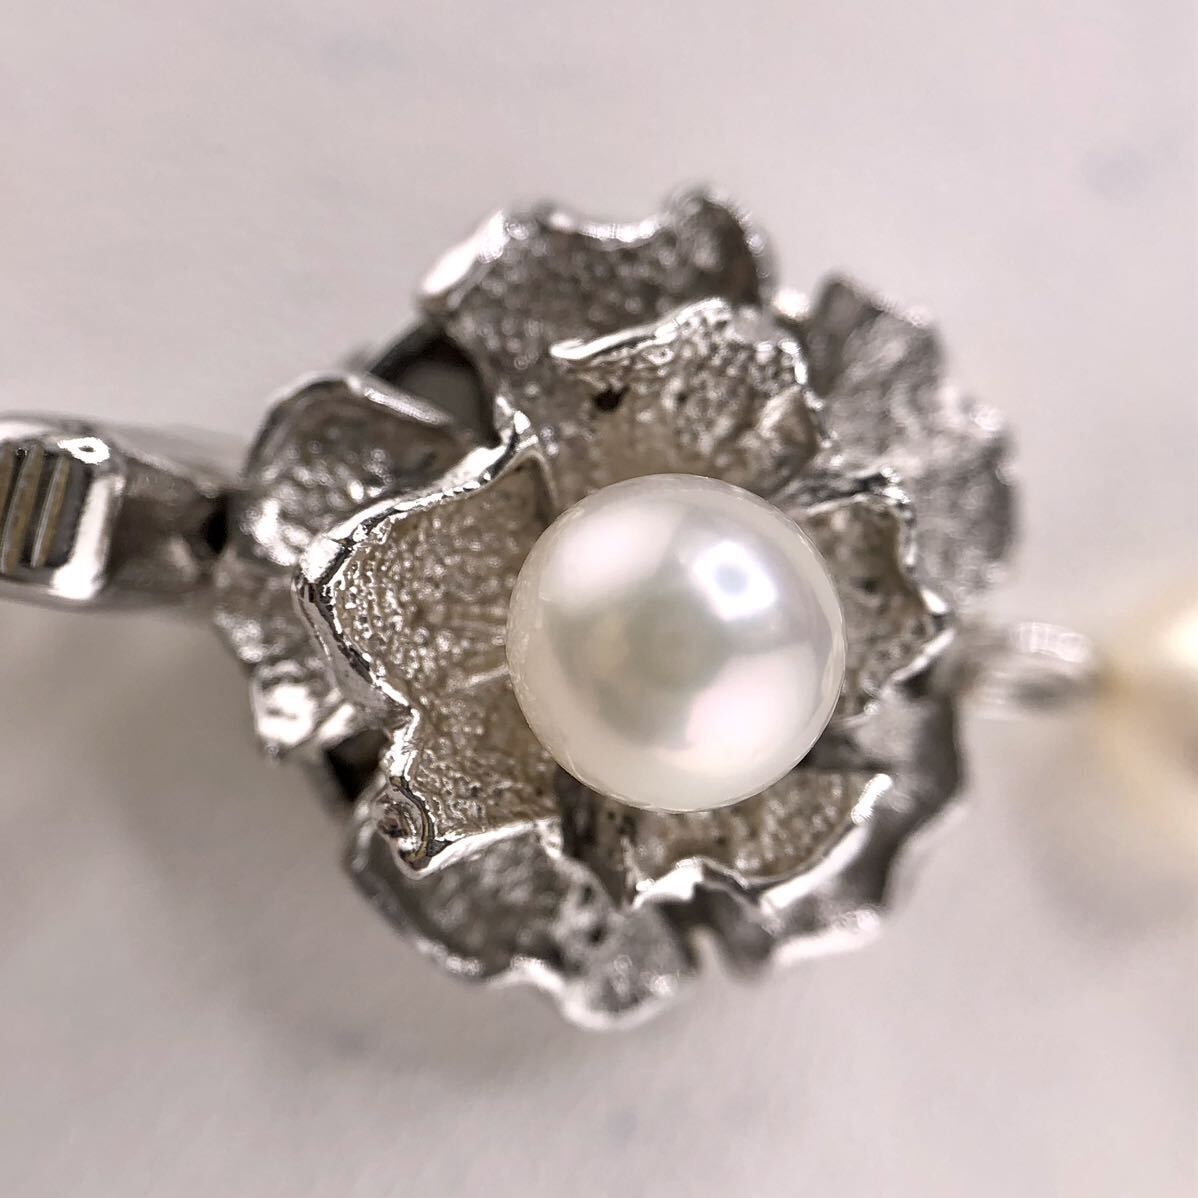 P04-0019☆ アコヤパールネックレス 6.5mm~7.0mm 59cm 39.6g ( アコヤ真珠 Pearl necklace SILVER )の画像4